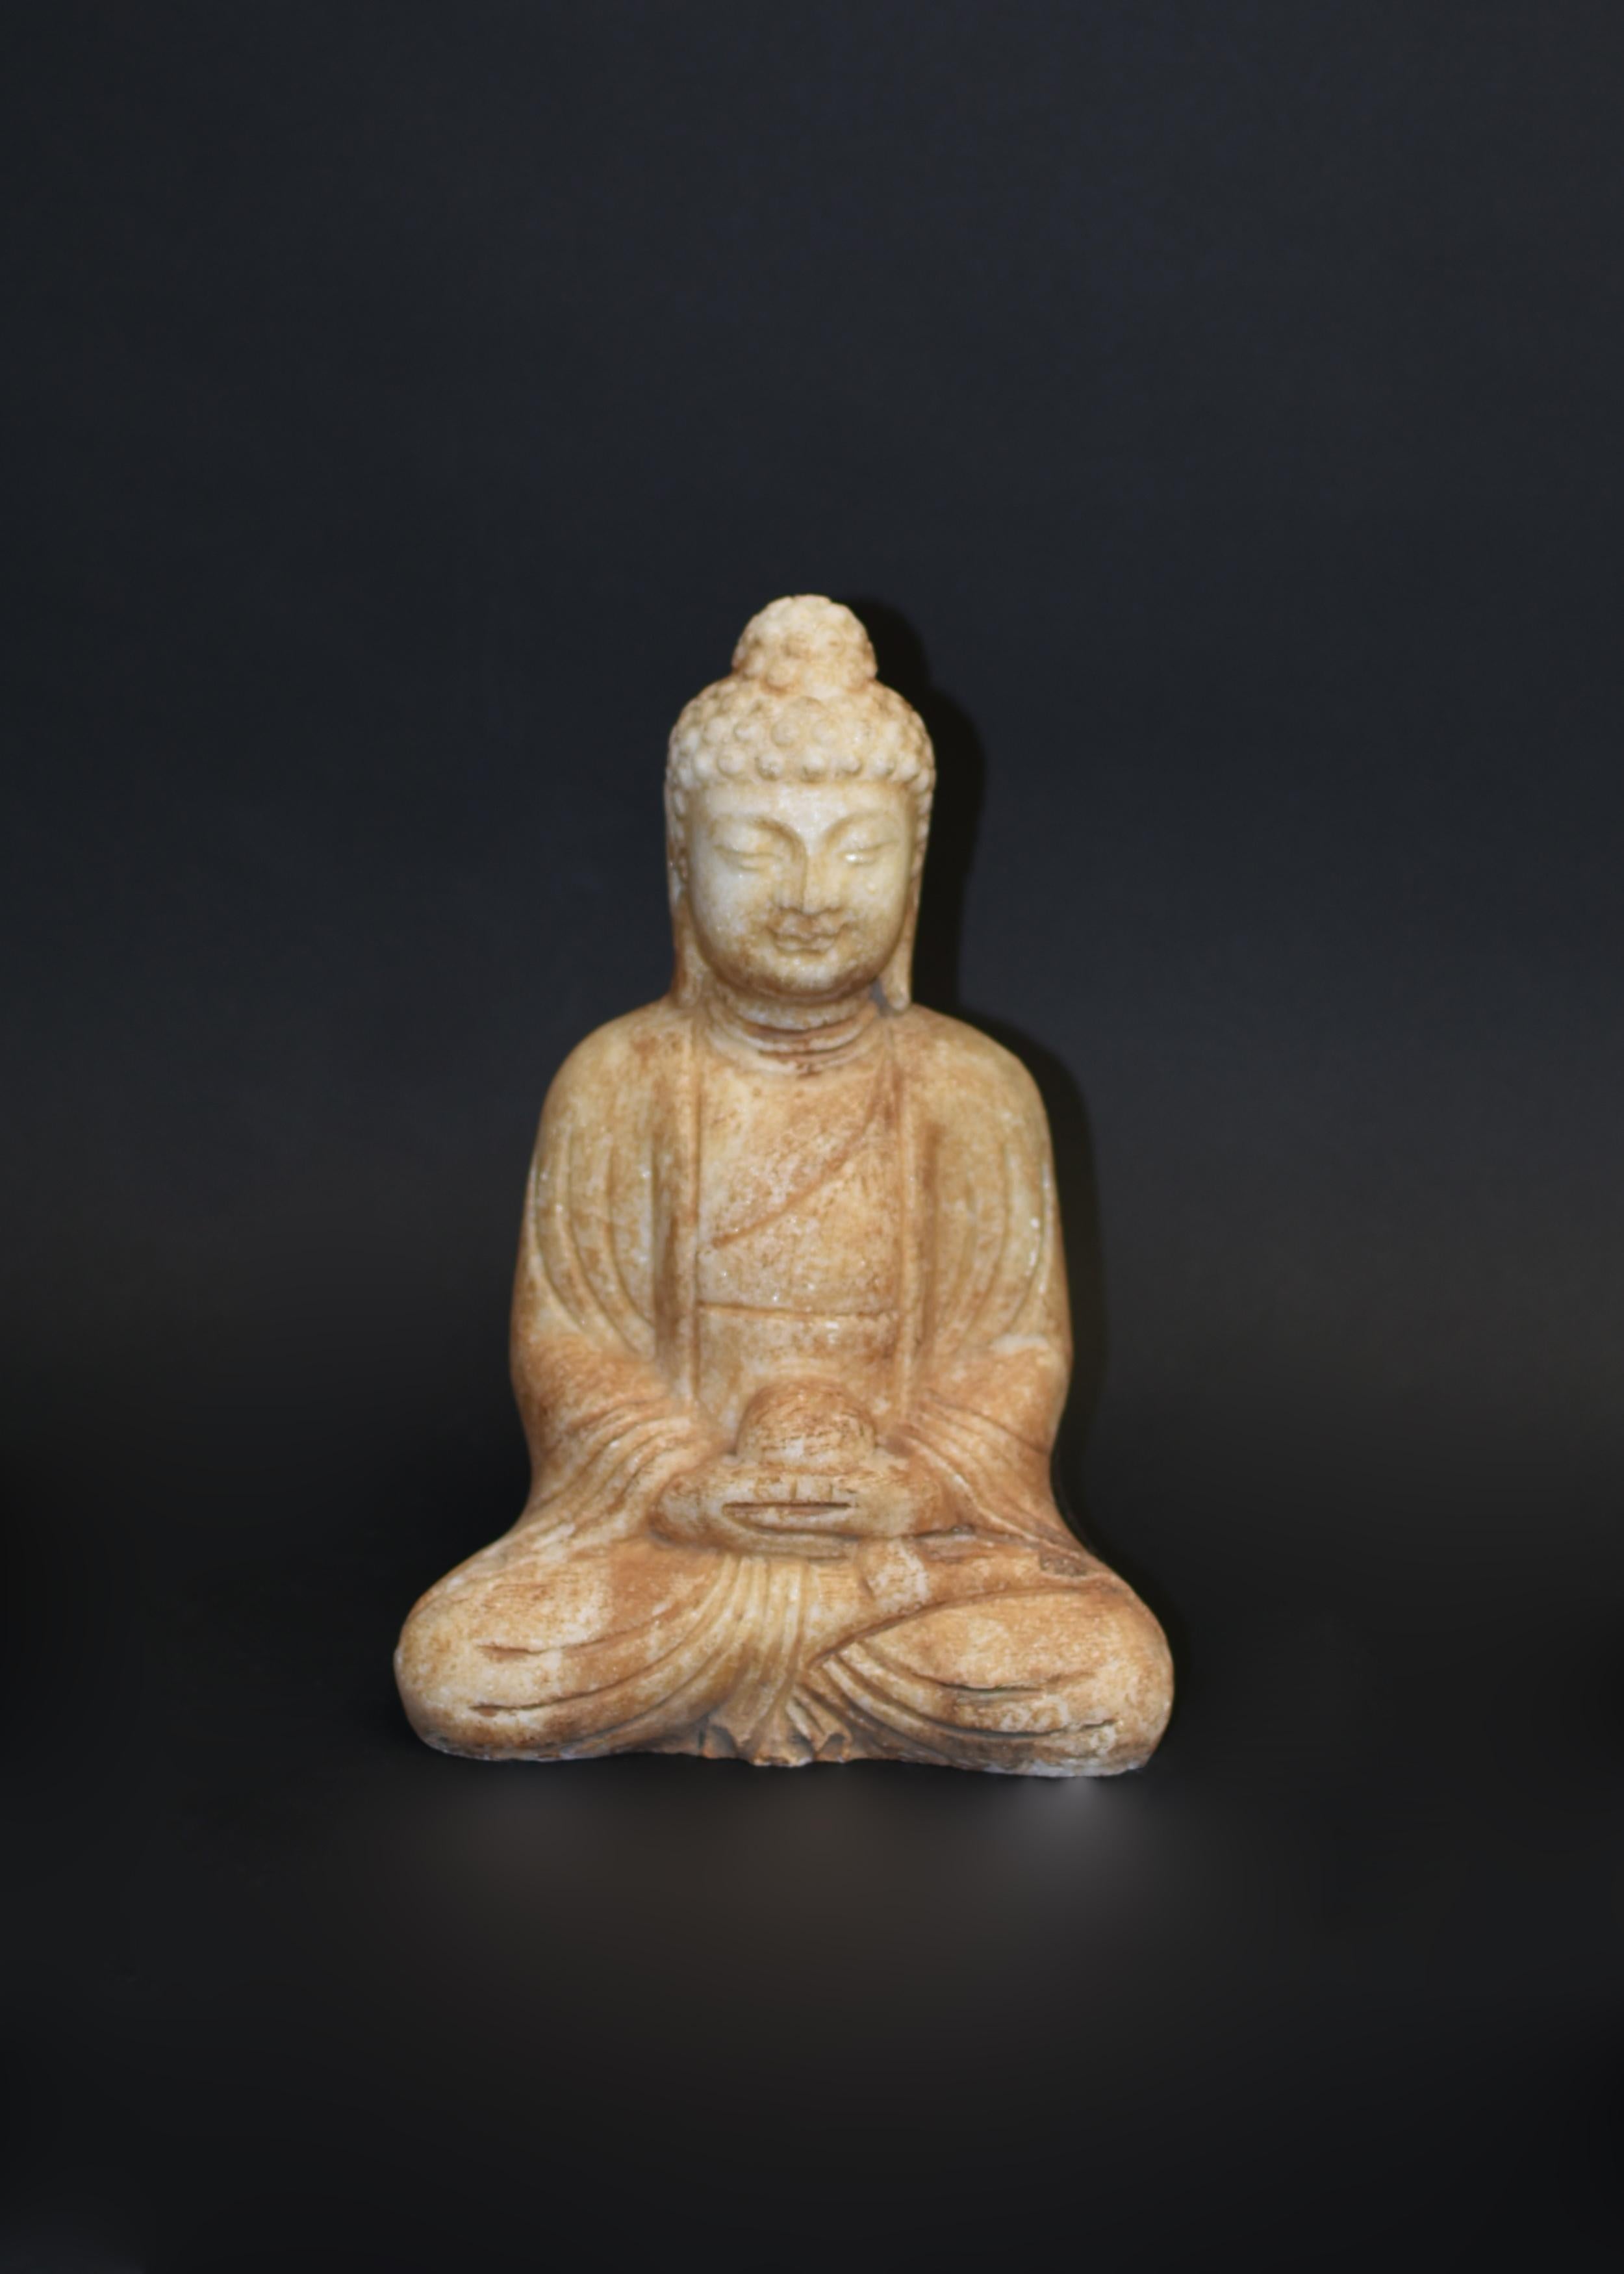 A hand carved 13.3 lb solid marble Buddha statue. Seated dhyana asana with hands in dhyana mudra, Buddha has a beautiful smile with broad face and large downcast eyes, flanked by pendulous earlobes, all under neatly coiled hair which is surmounted